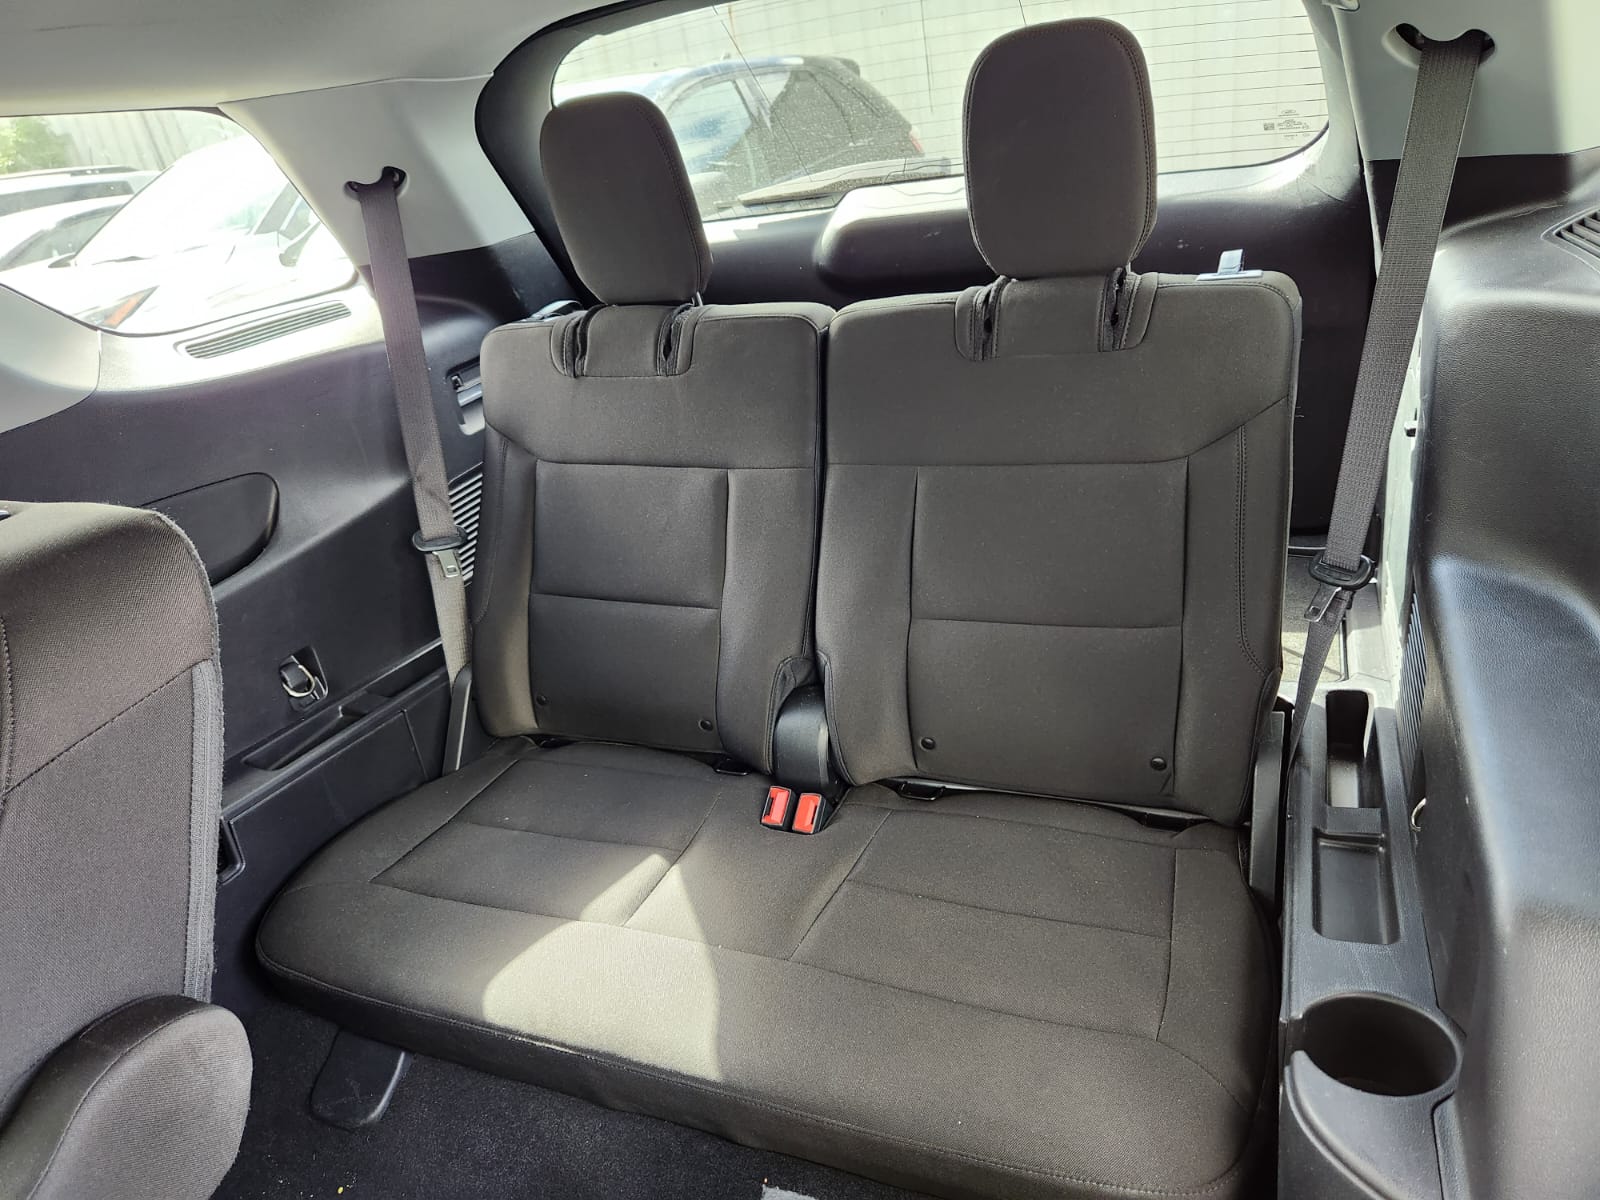 Ford Explorer Interior Back 2nd Row